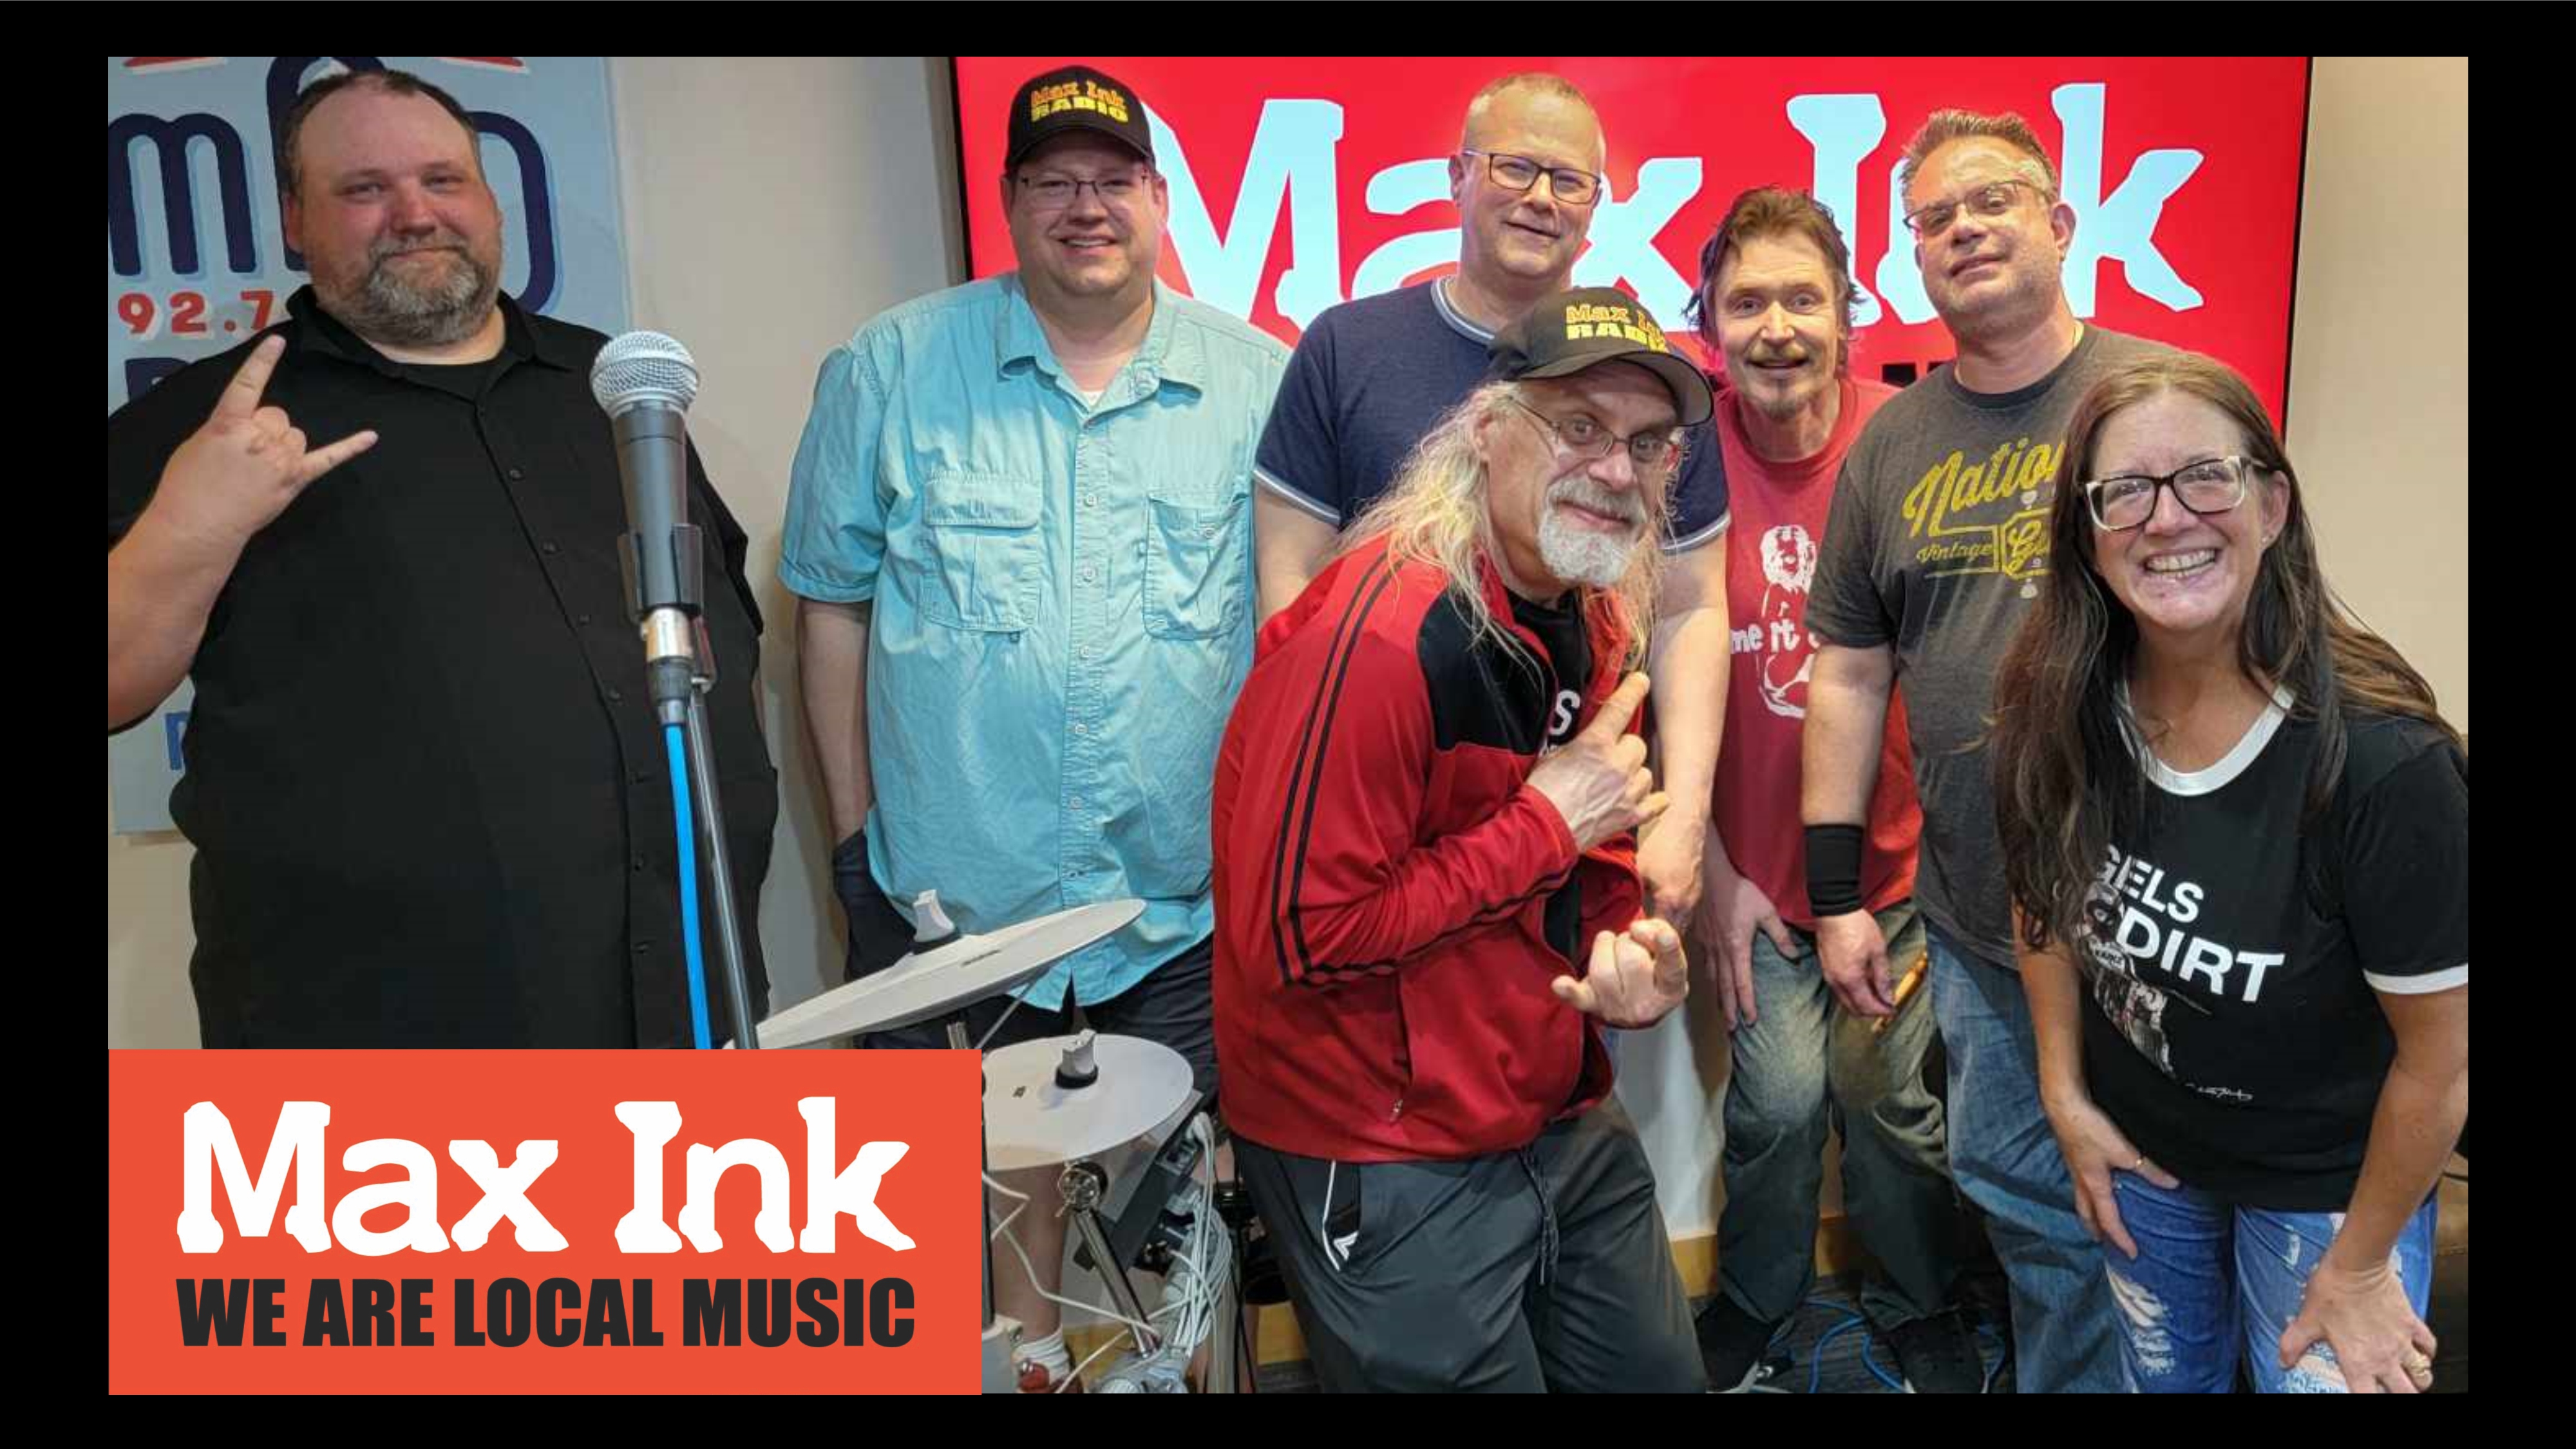 Blame it on Cain rocks listeners with acoustic showcase on Max Ink Radio